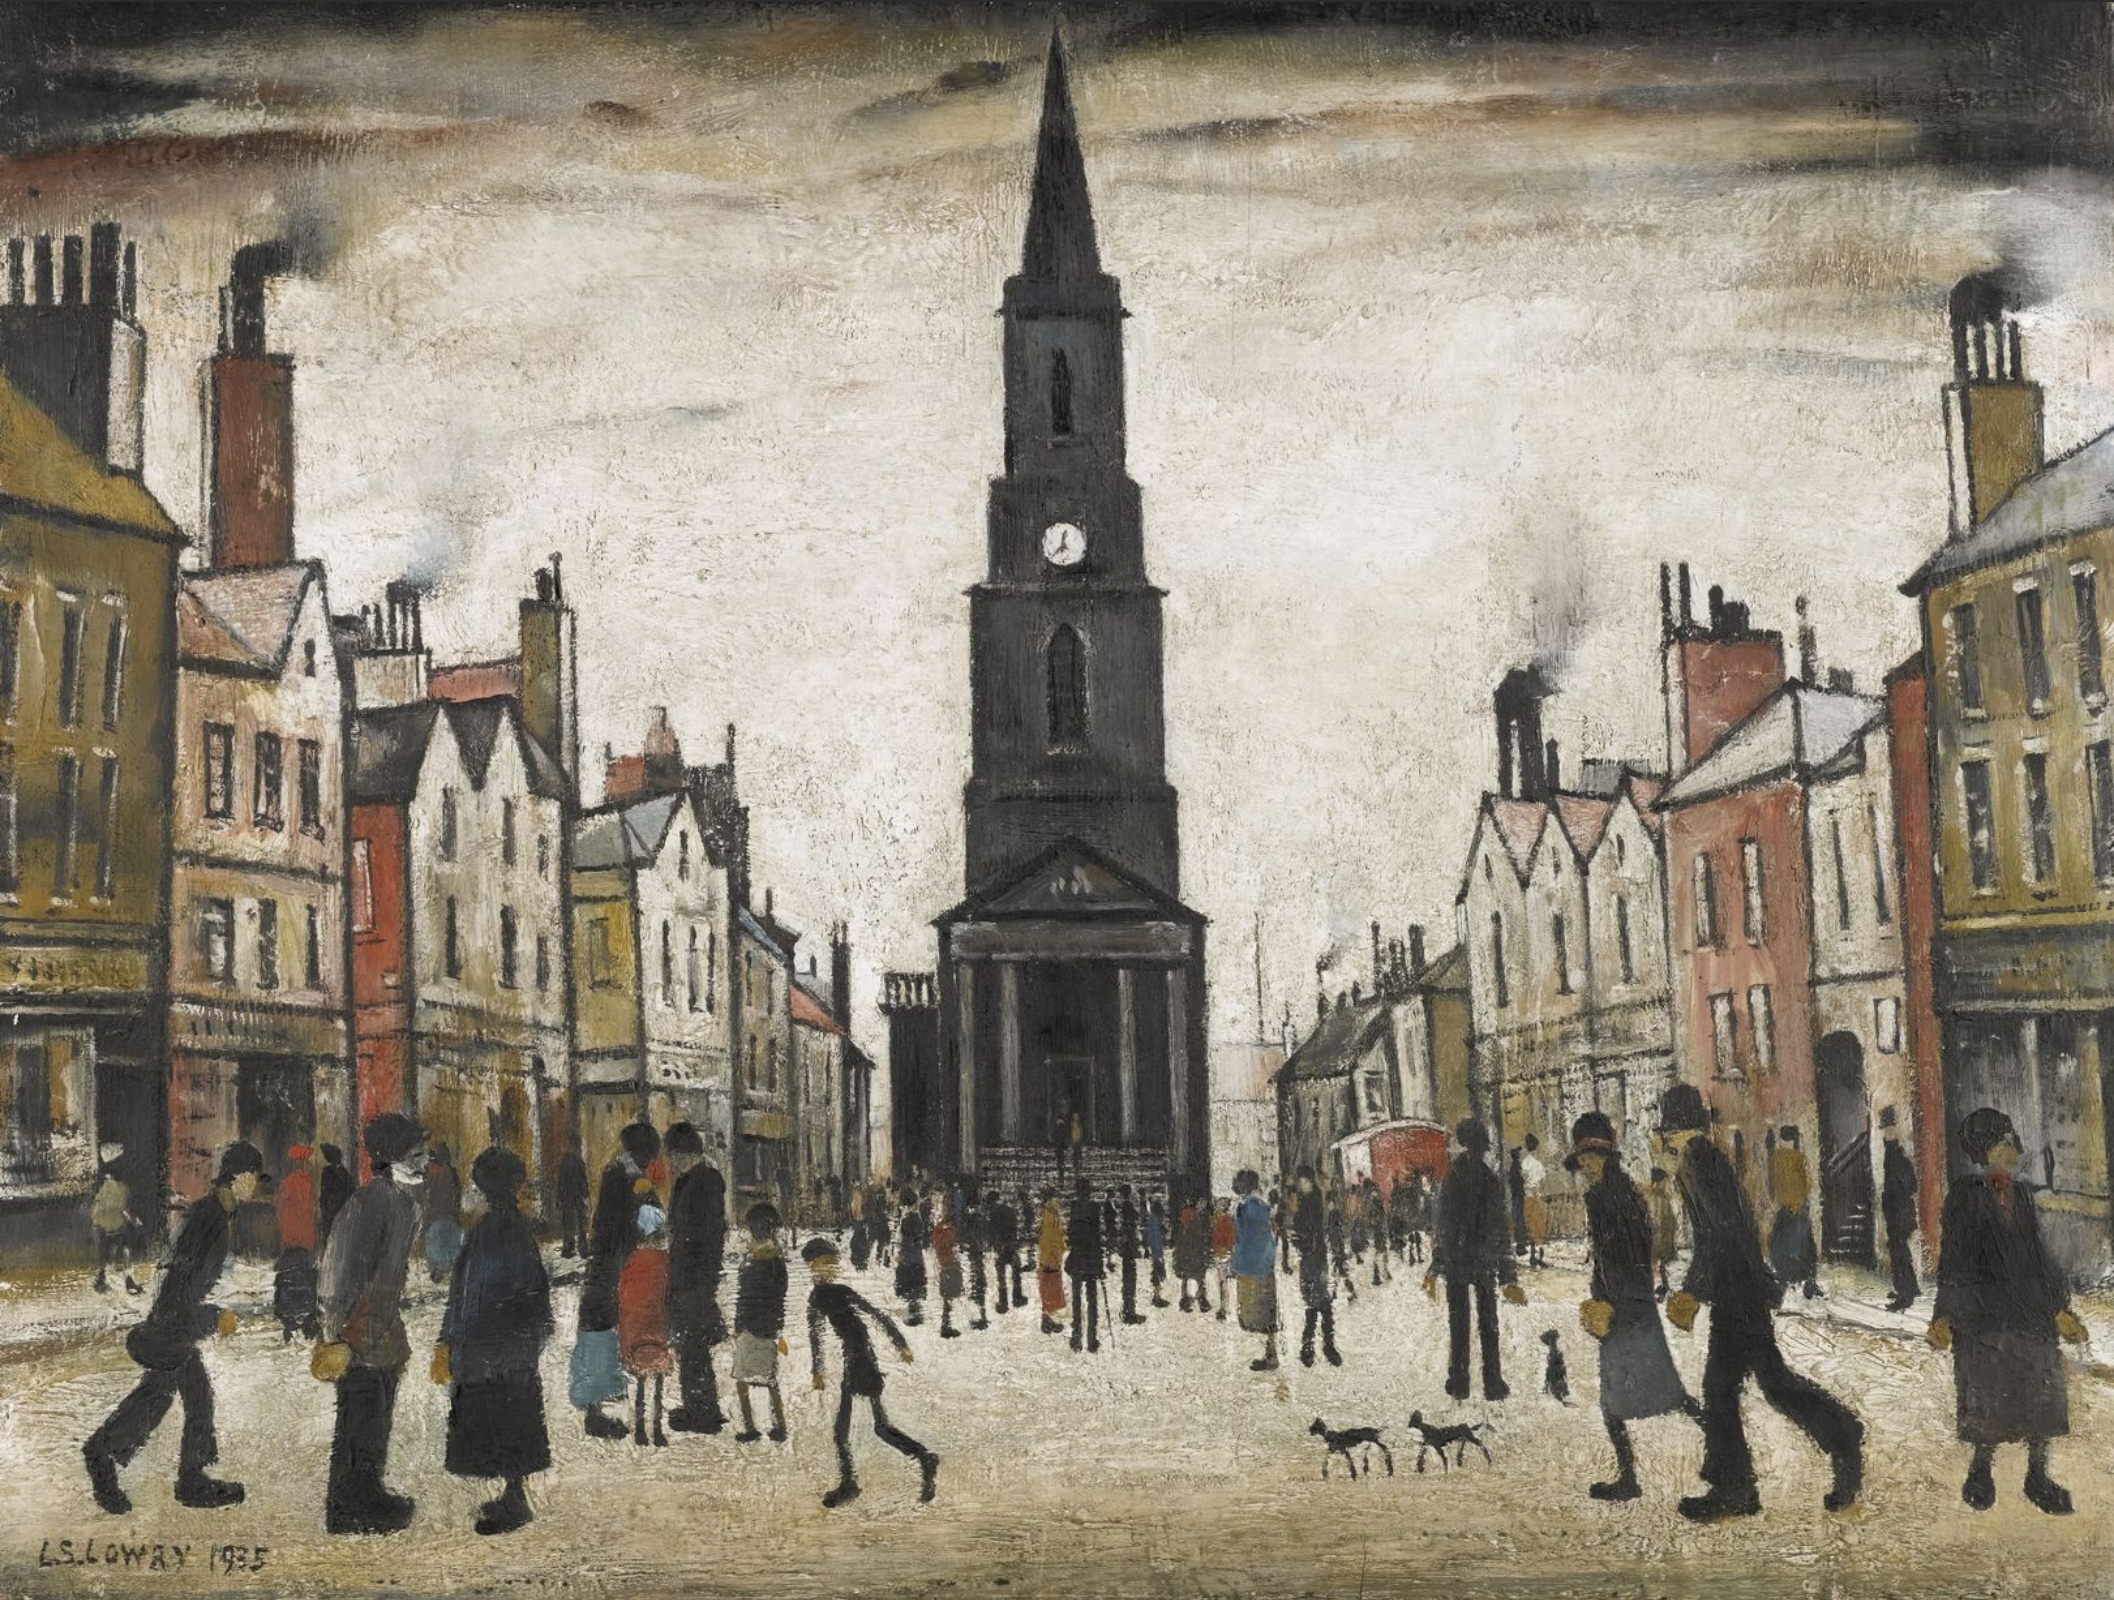 A Market Place, Berwick-Upon-Tweed (1939) by Laurence Stephen Lowry (1887 - 1976), English artist.